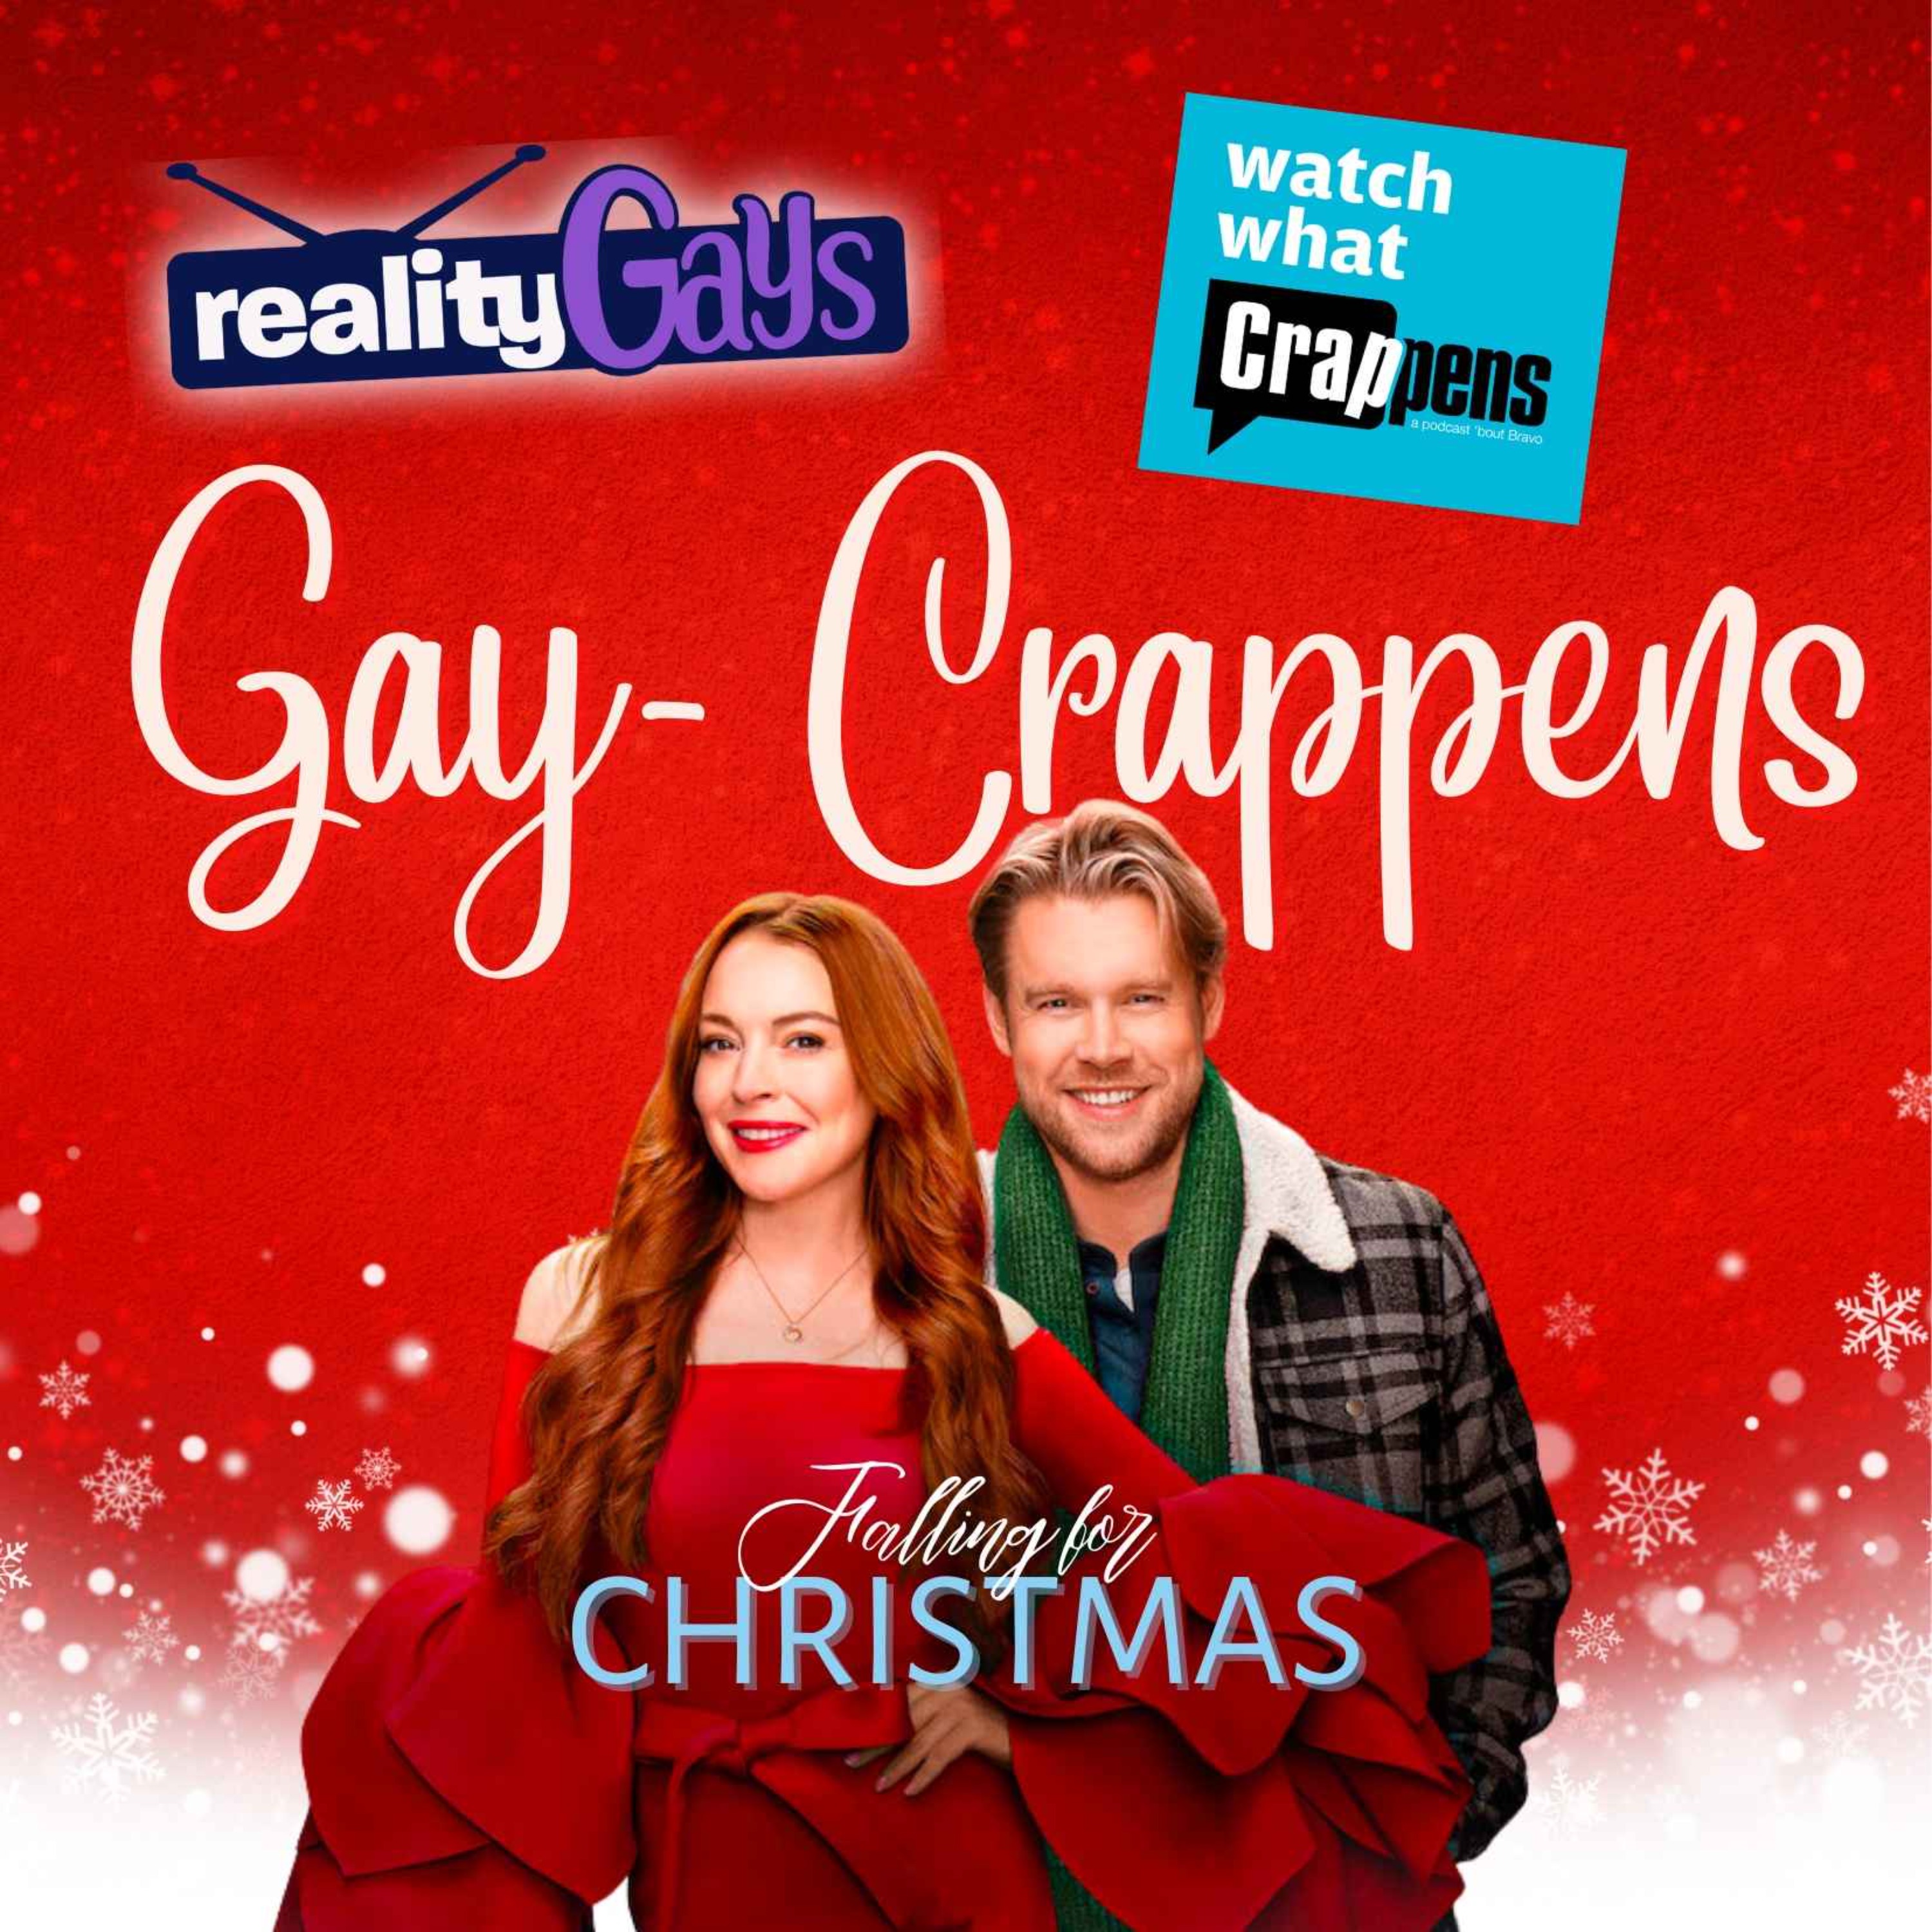 Reality Gays: Trash TV and GayDD with Mattie and Poodle - Gay Crappens: Falling for Christmas Part 3 of 4